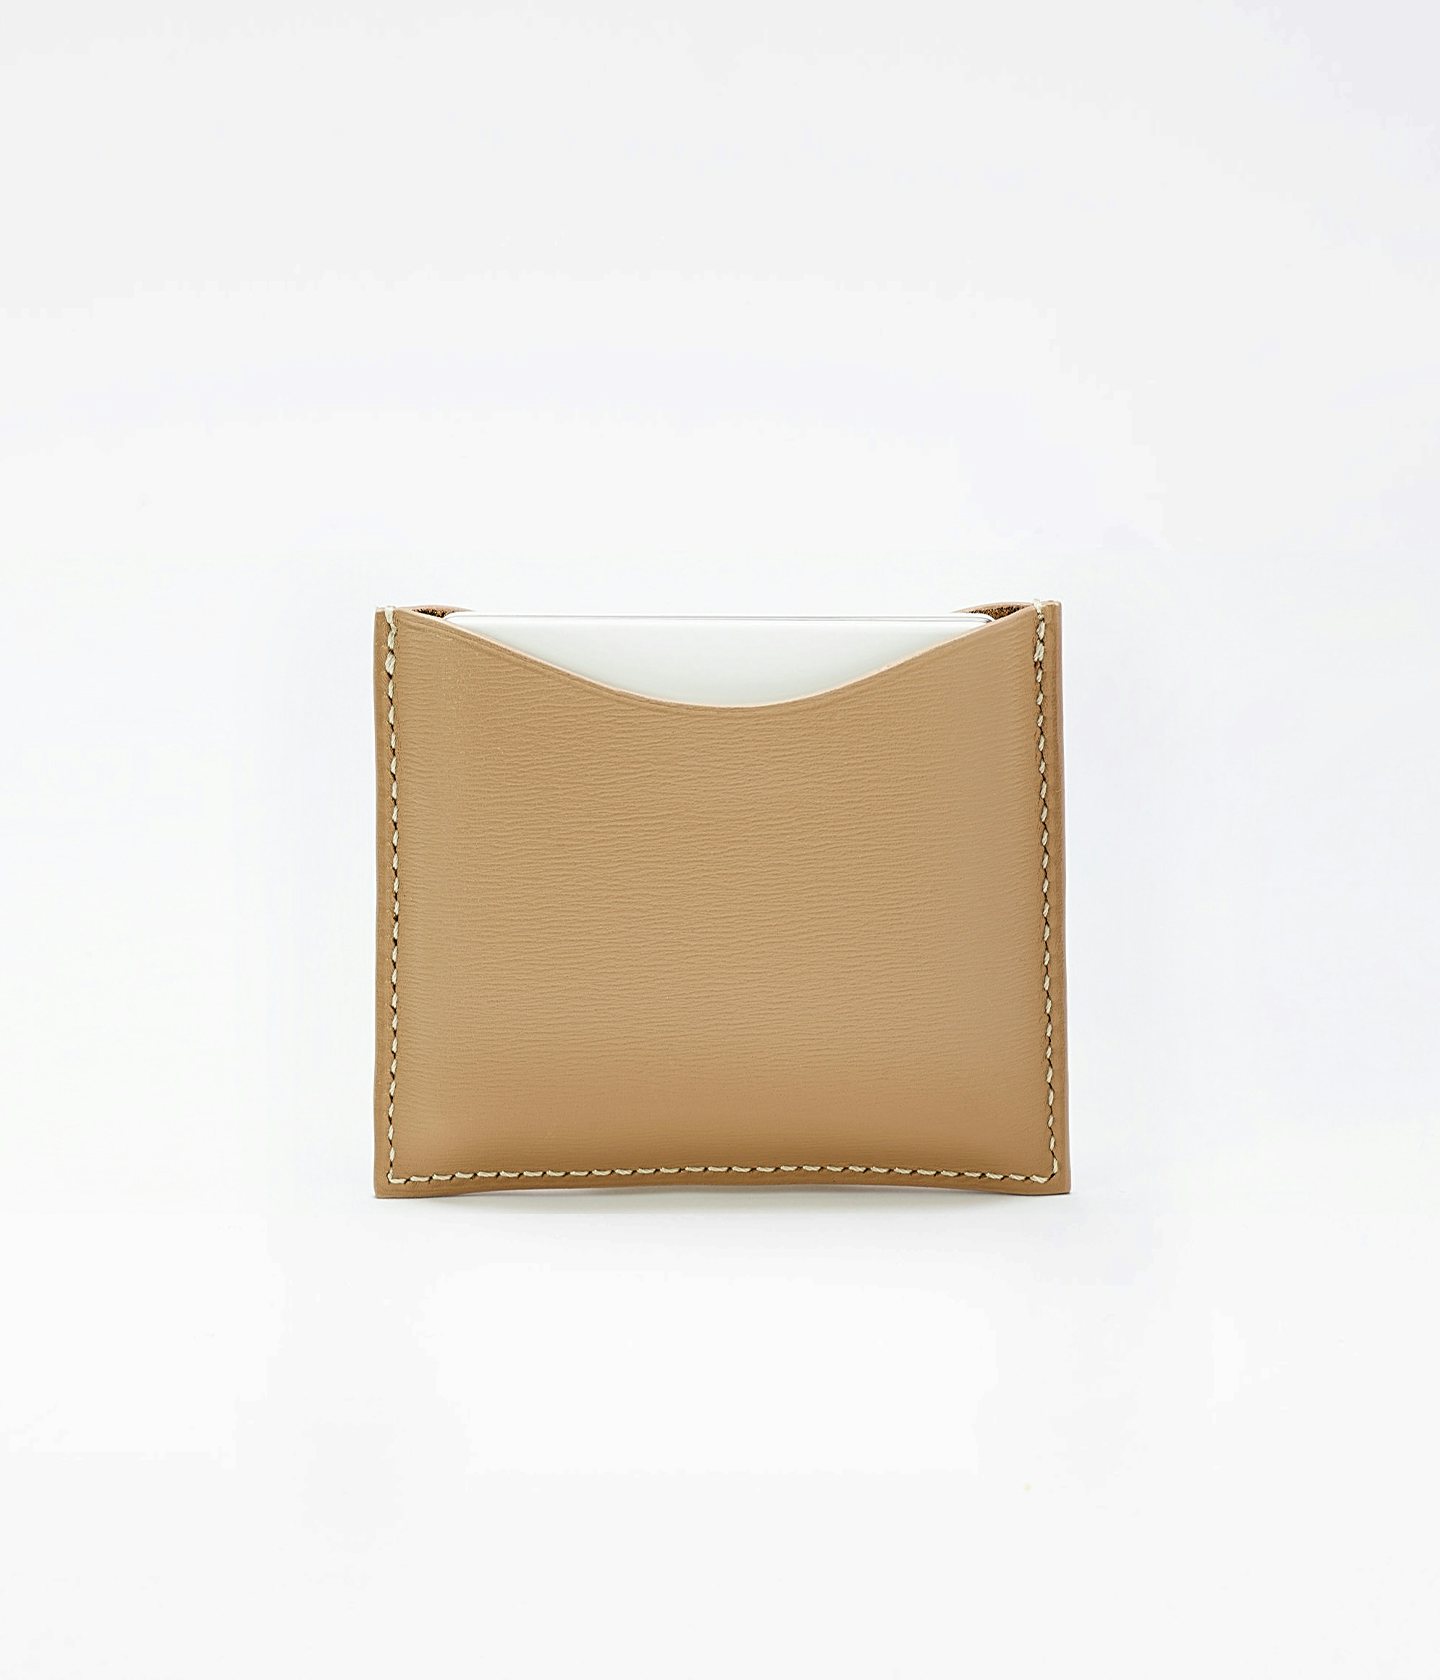 La bouche rouge upcycled fine leather compact case in Camel